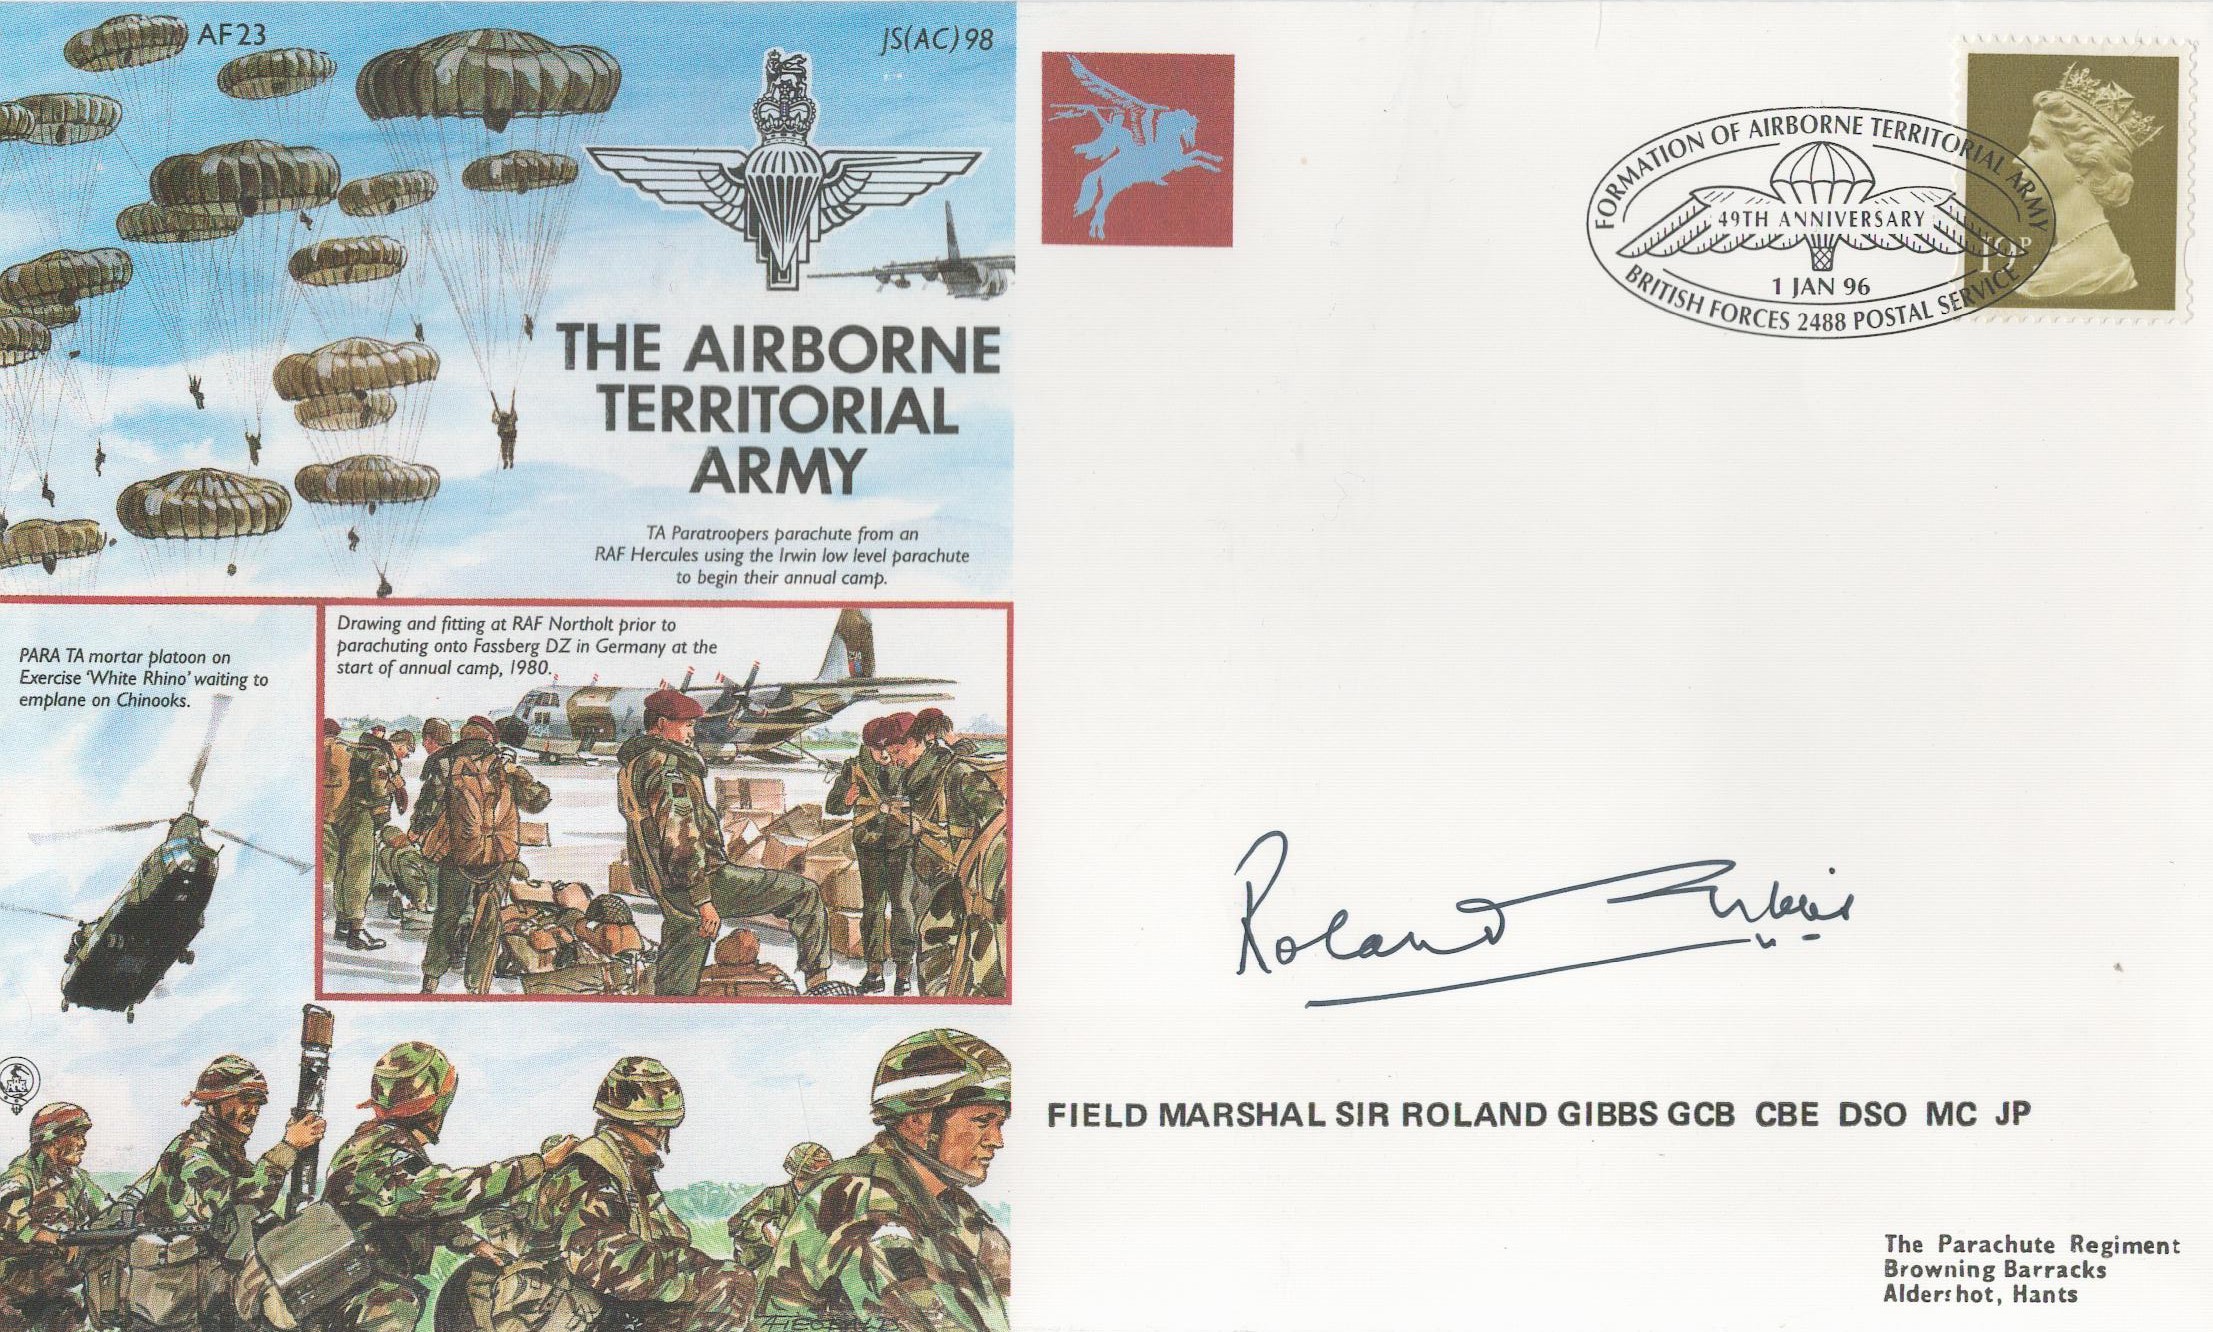 Field Marshal Sir Roland Gibbs GCB CBE DSO MC JP Signed The Airborne Territorial Army FDC. British